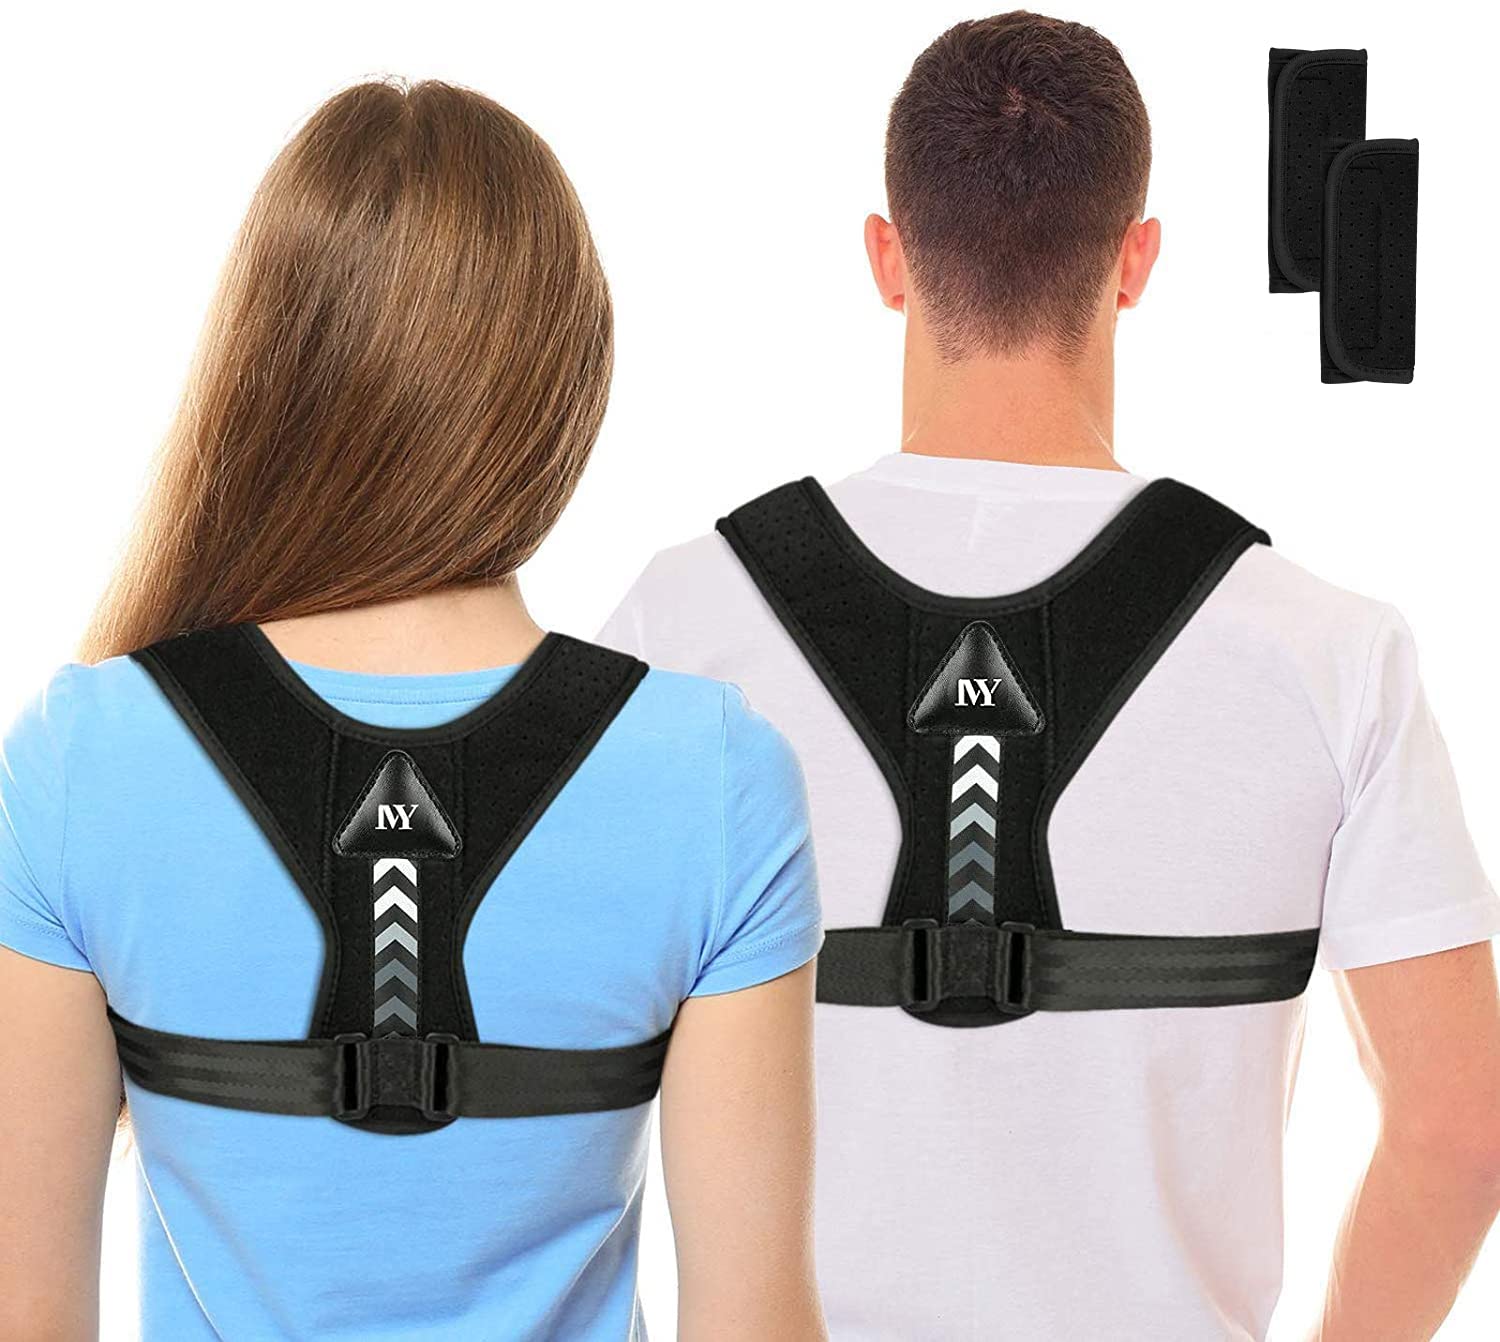 Thoracic Brace - Treat a Bad Back with Thoracic Posture Brace